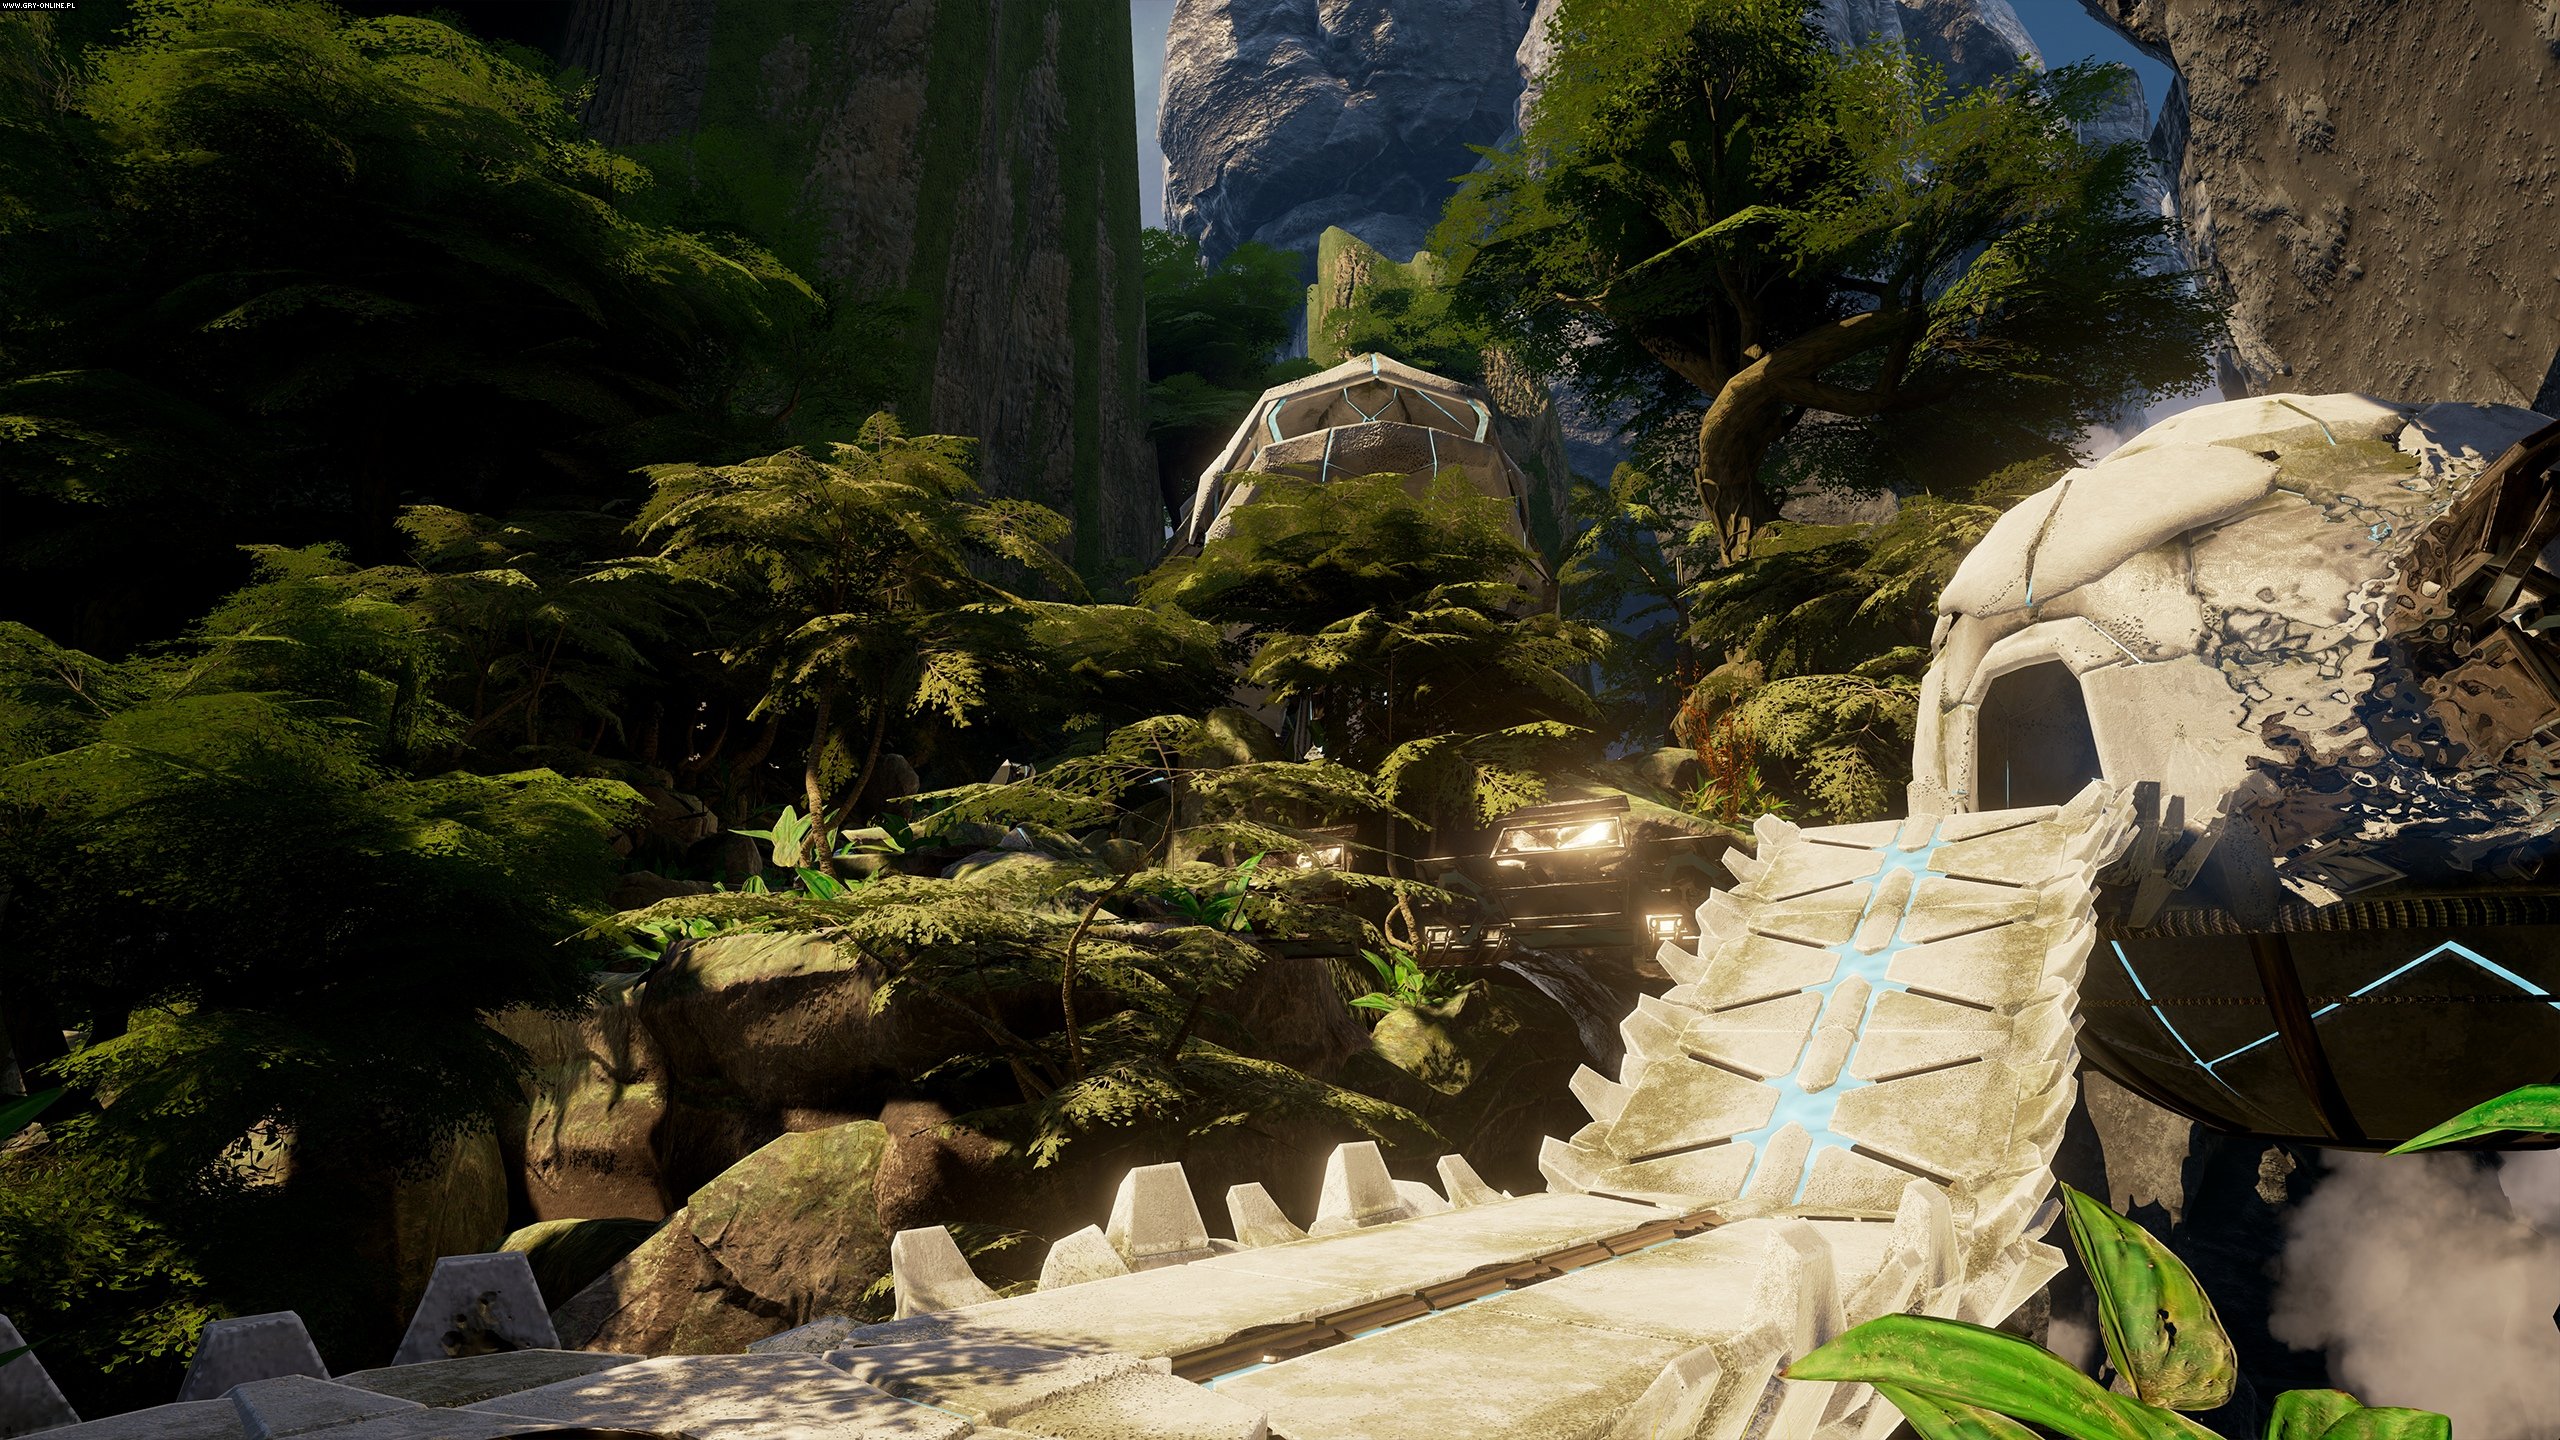 download cyan obduction for free